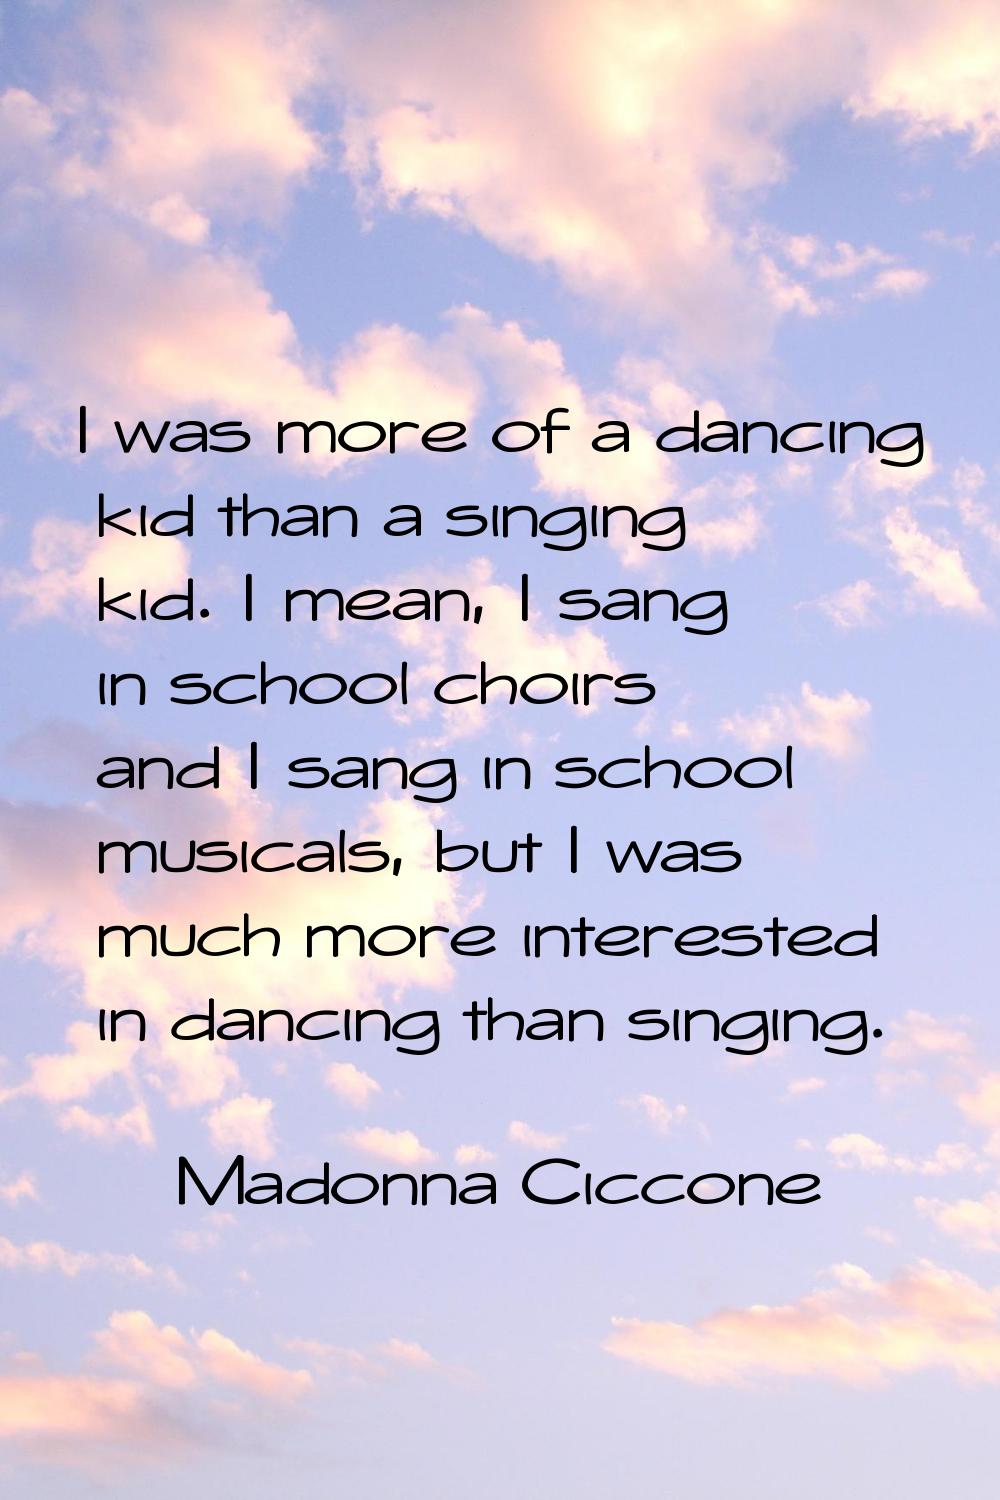 I was more of a dancing kid than a singing kid. I mean, I sang in school choirs and I sang in schoo